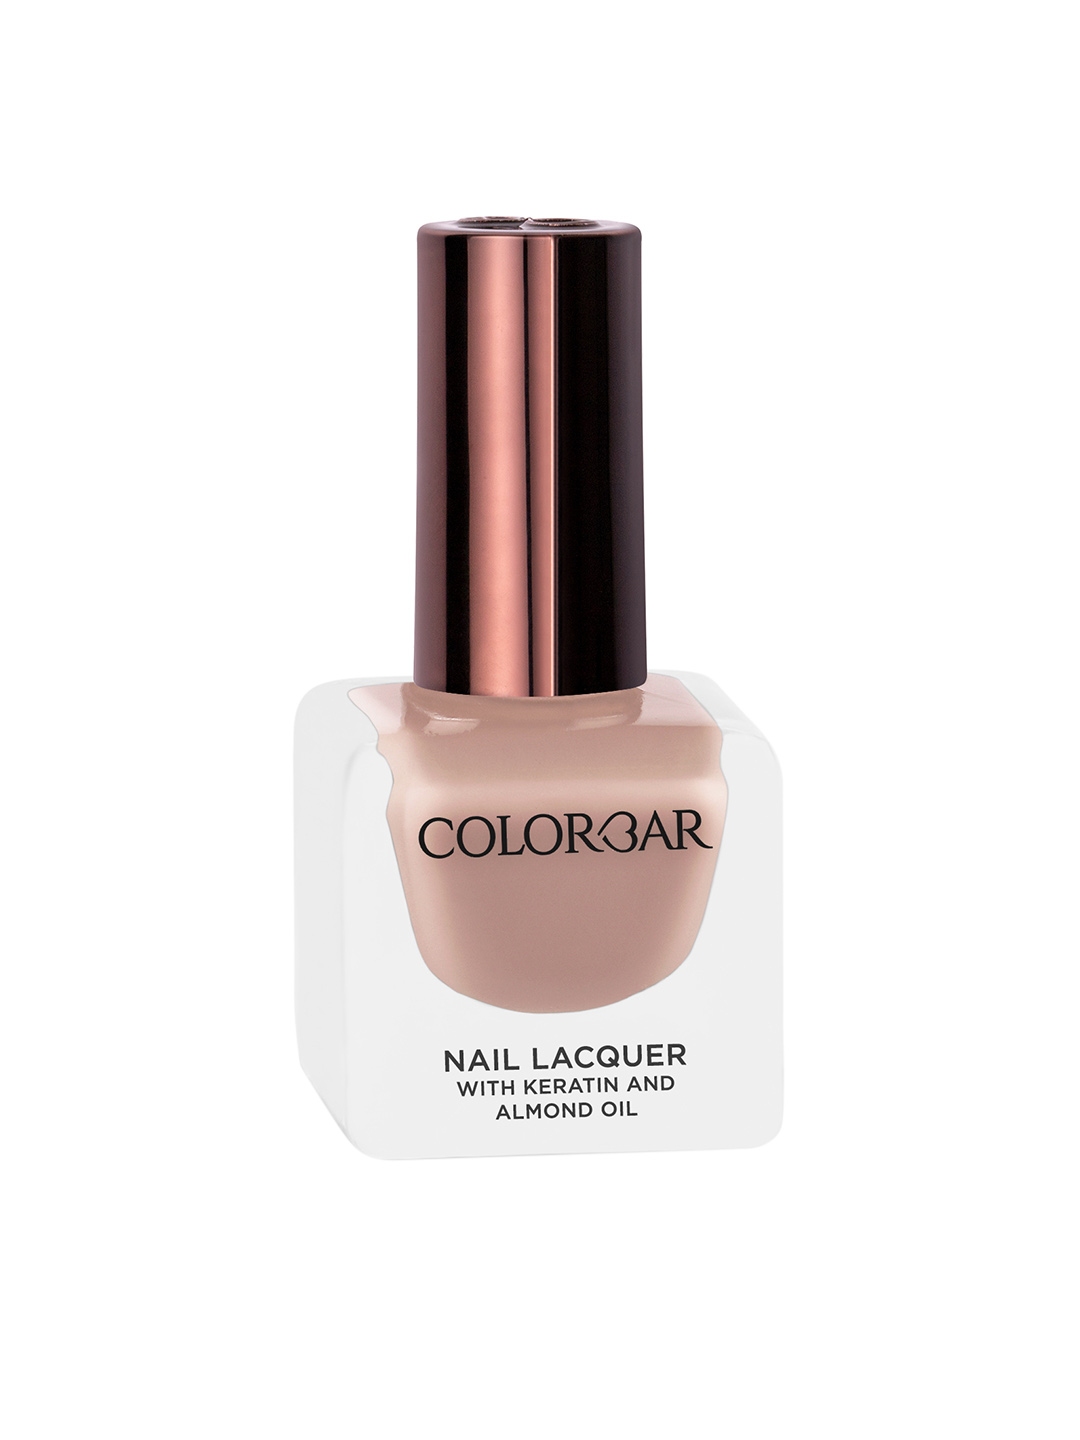 undercover colors nail polish price